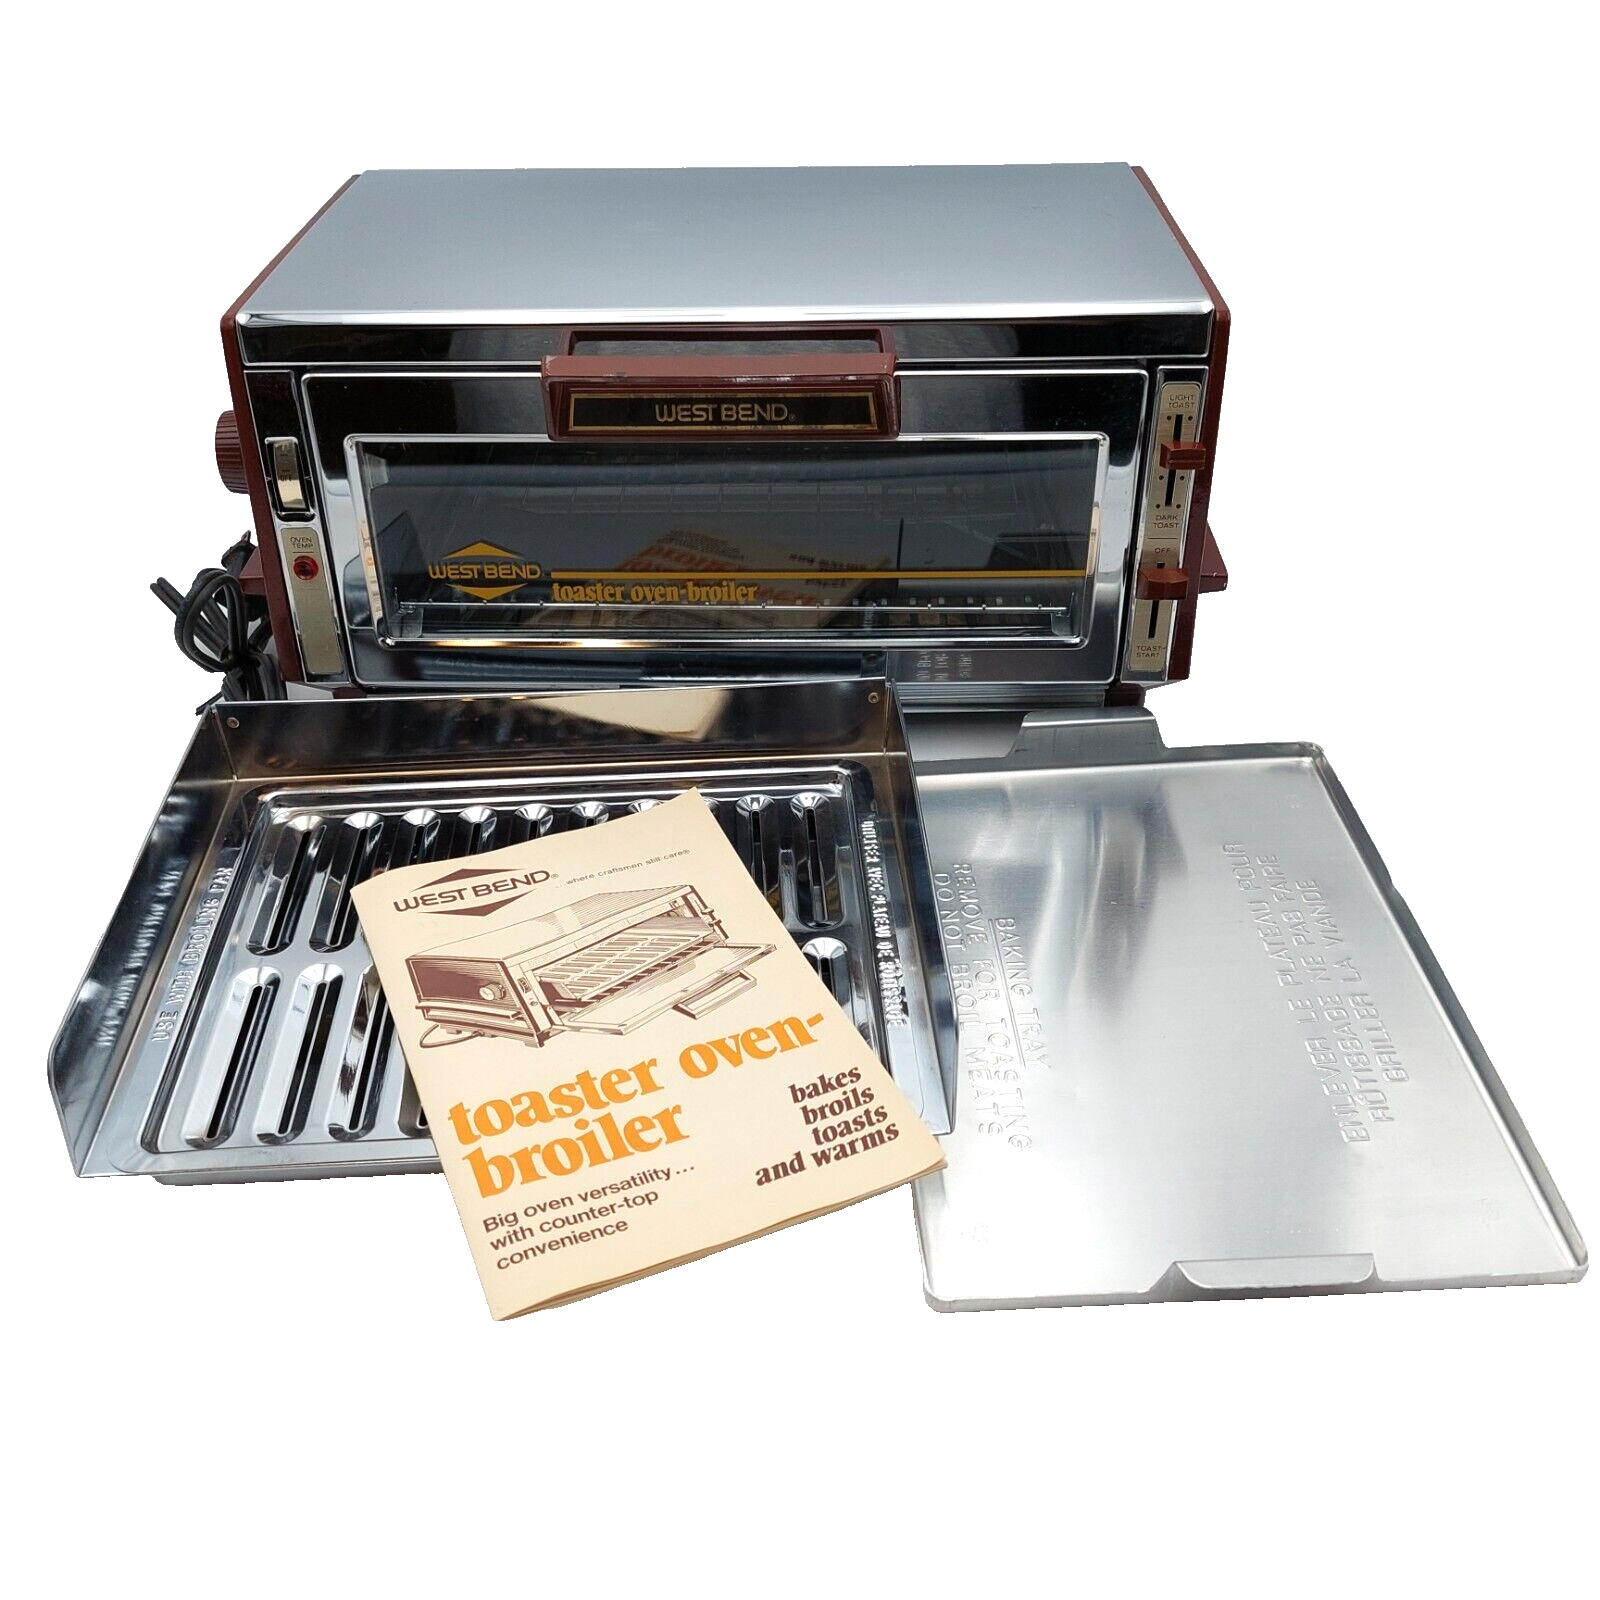 Vintage West Bend Toaster Oven Broiler Countertop Model 5351 Chrome w/Brown Trim - $47.88